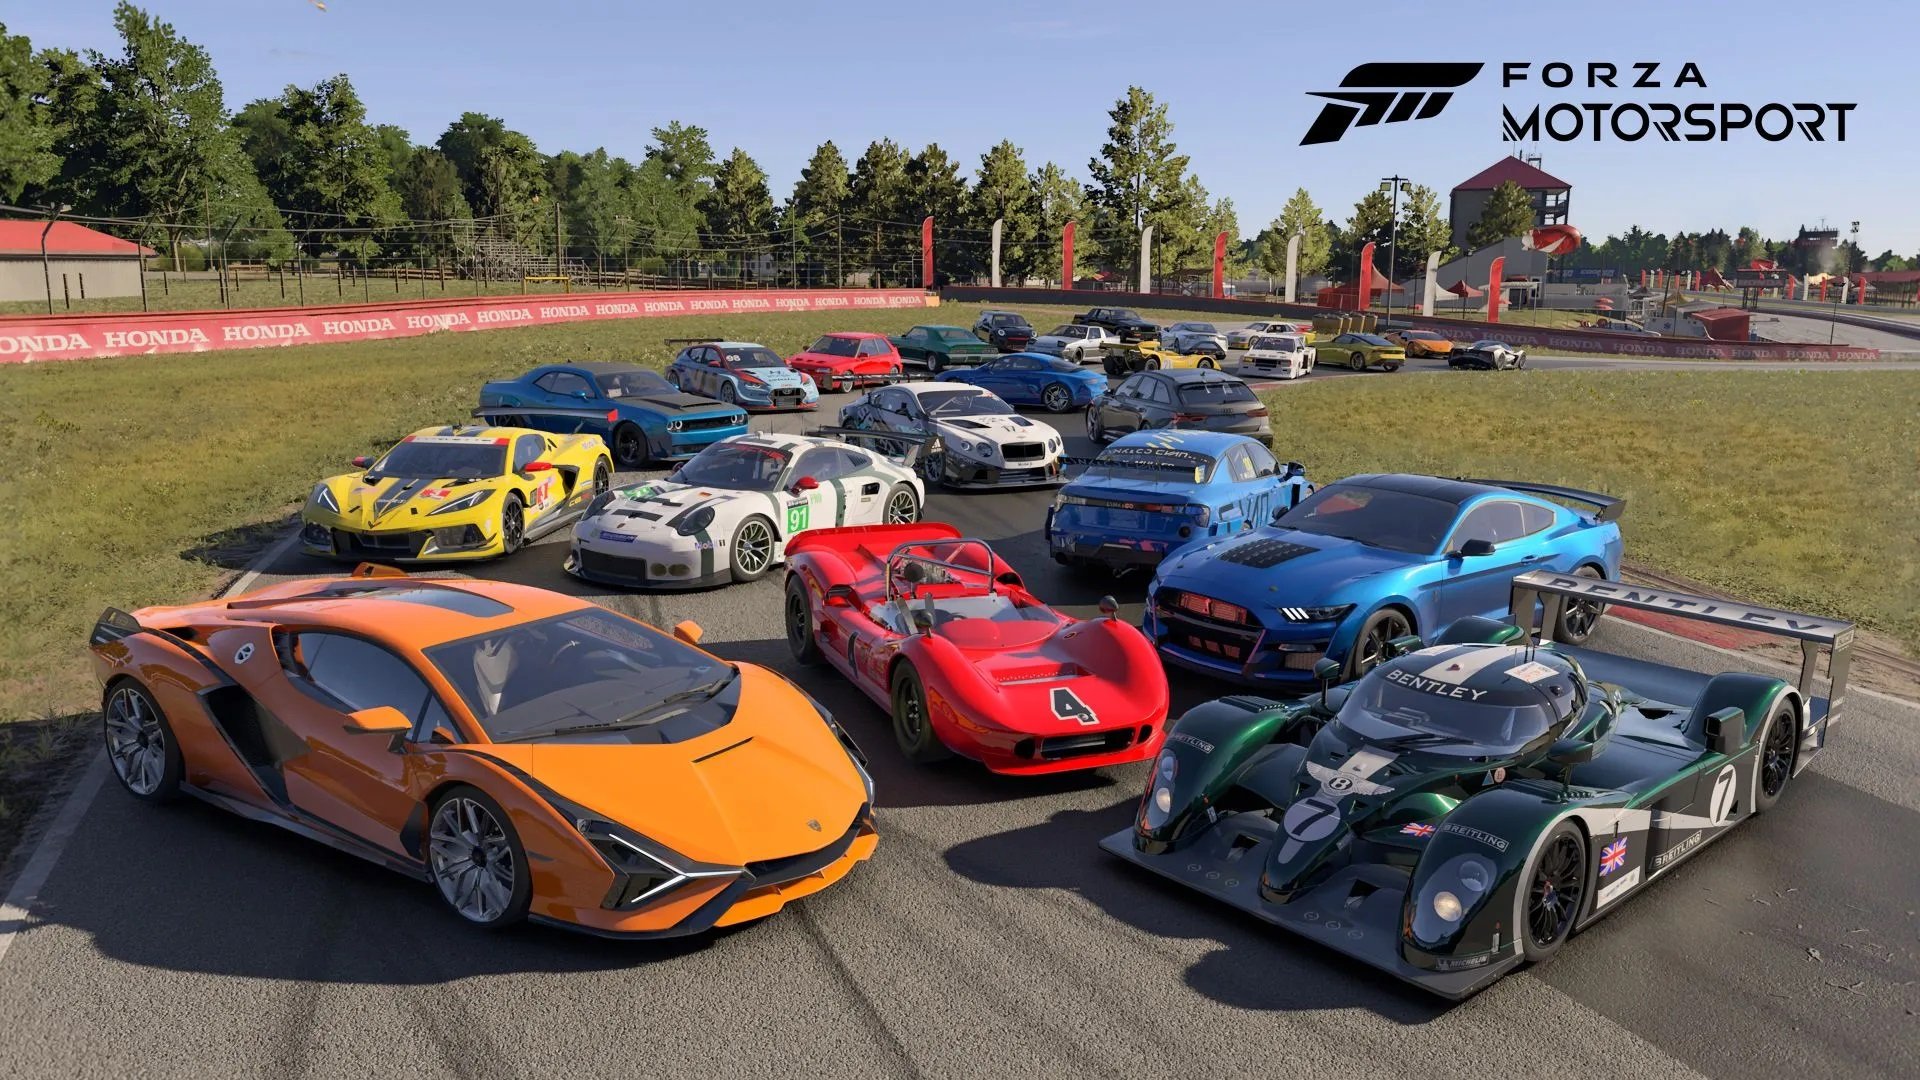 All The Latest Forza News, Reviews, Trailers & Guides